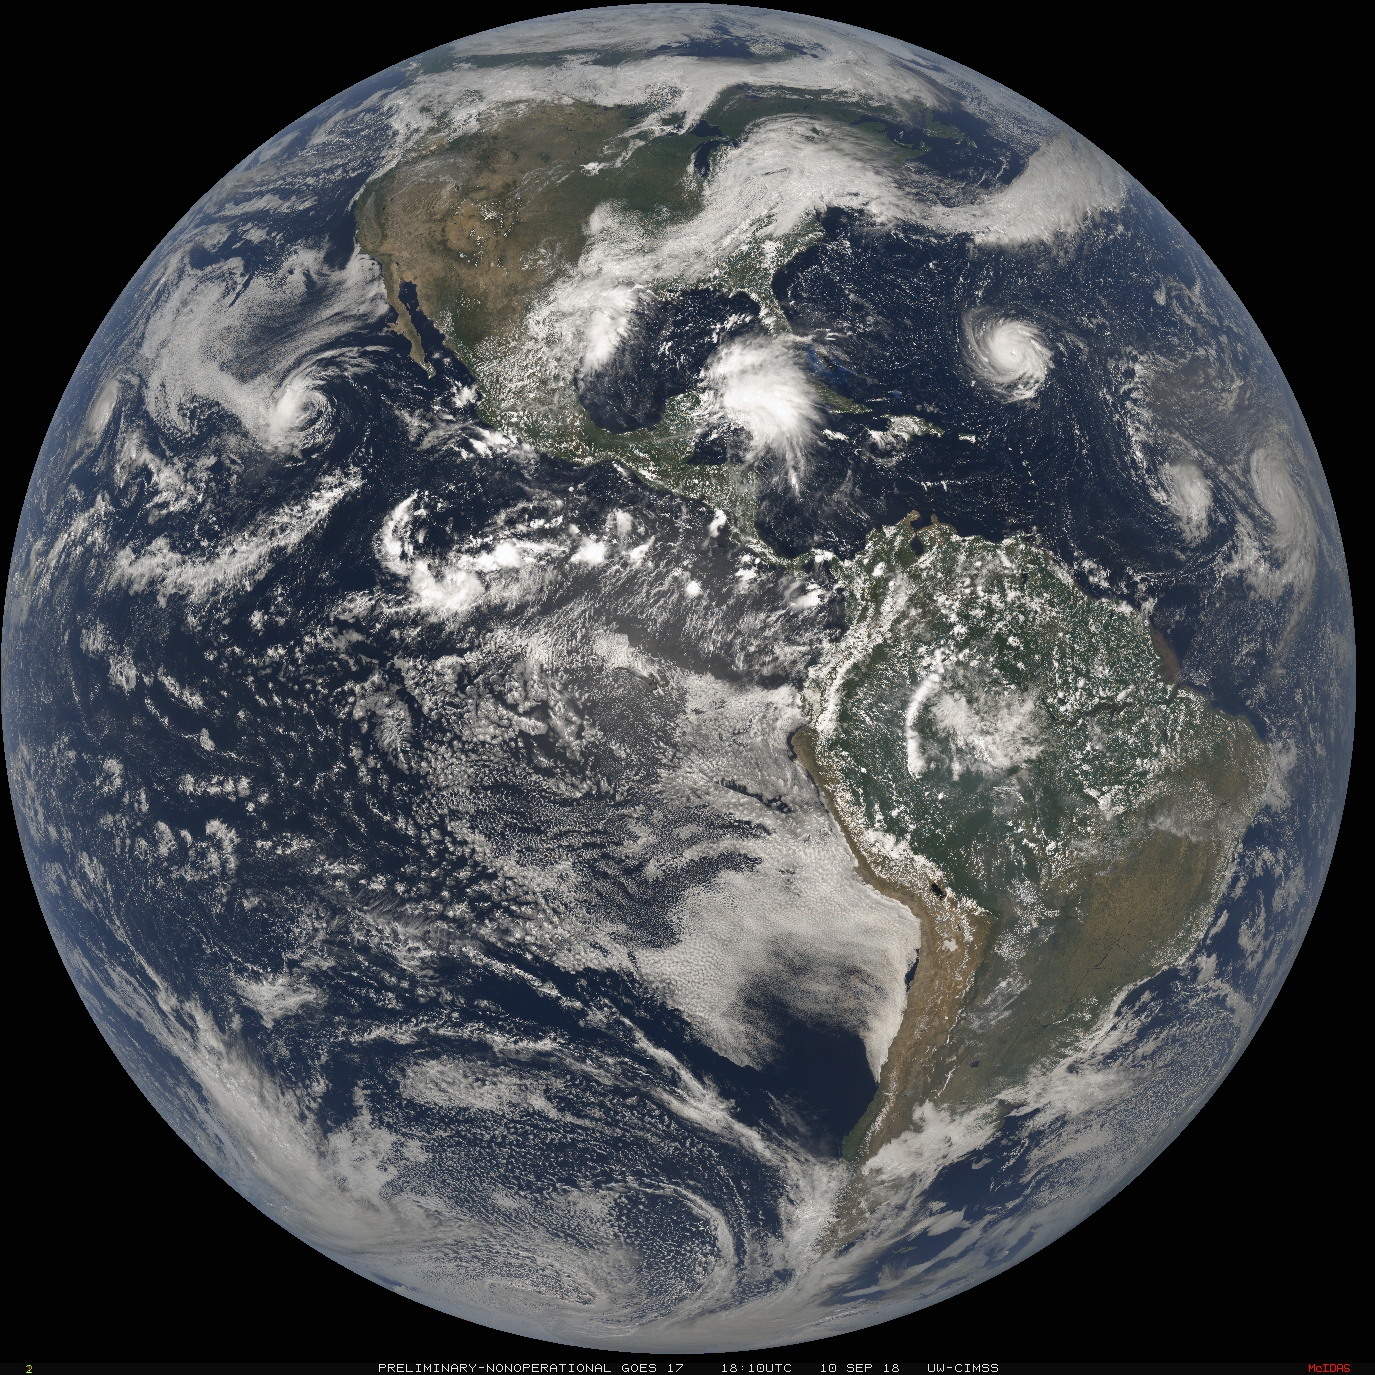 GOES-17 Full Disk true color images [click to play animation]